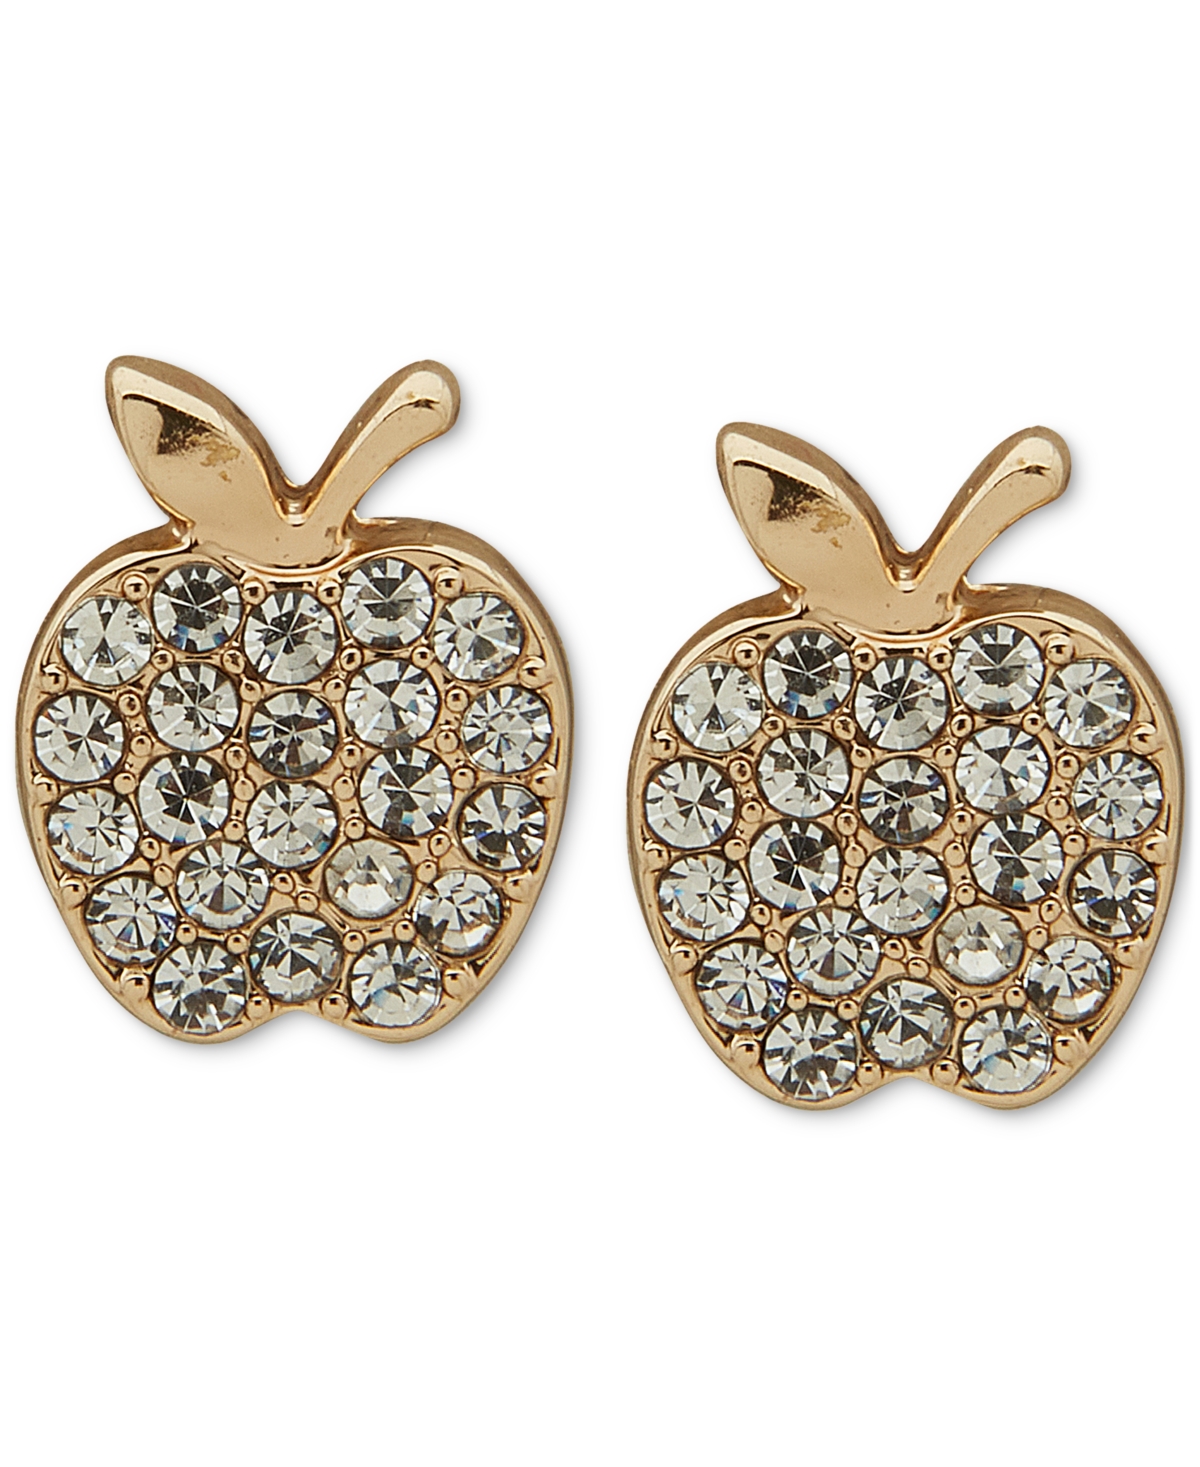 Gold-Tone Pave Crystal Apple Stud Earrings - Crystal Wh